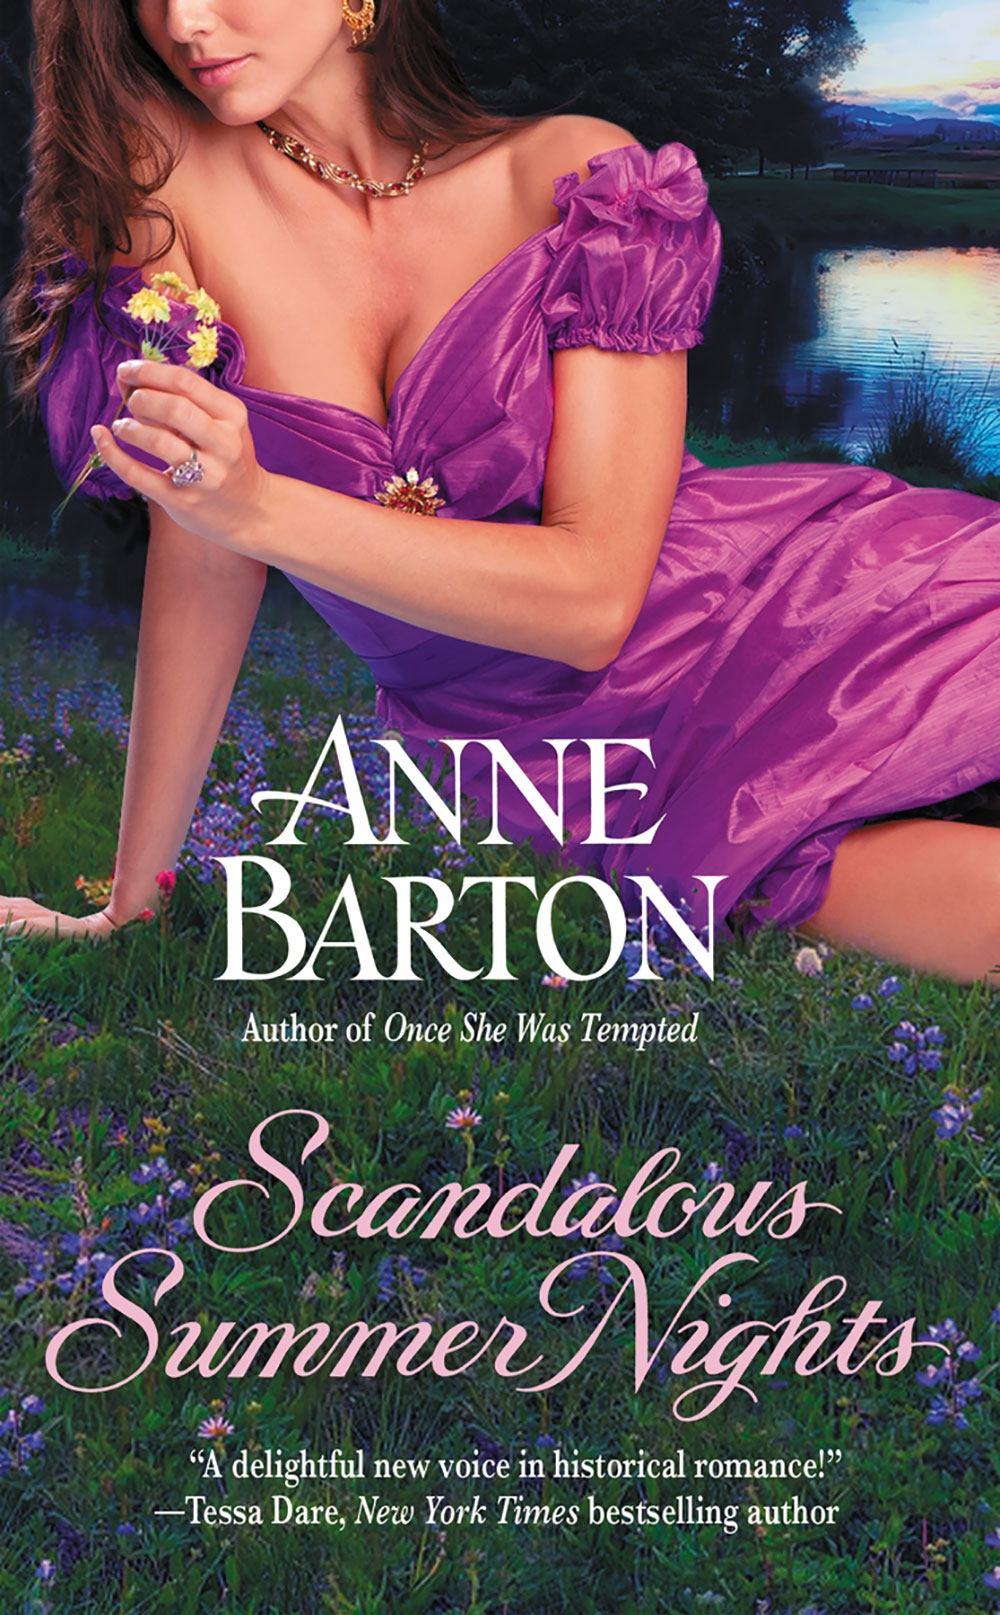 that scandalous summer by meredith duran